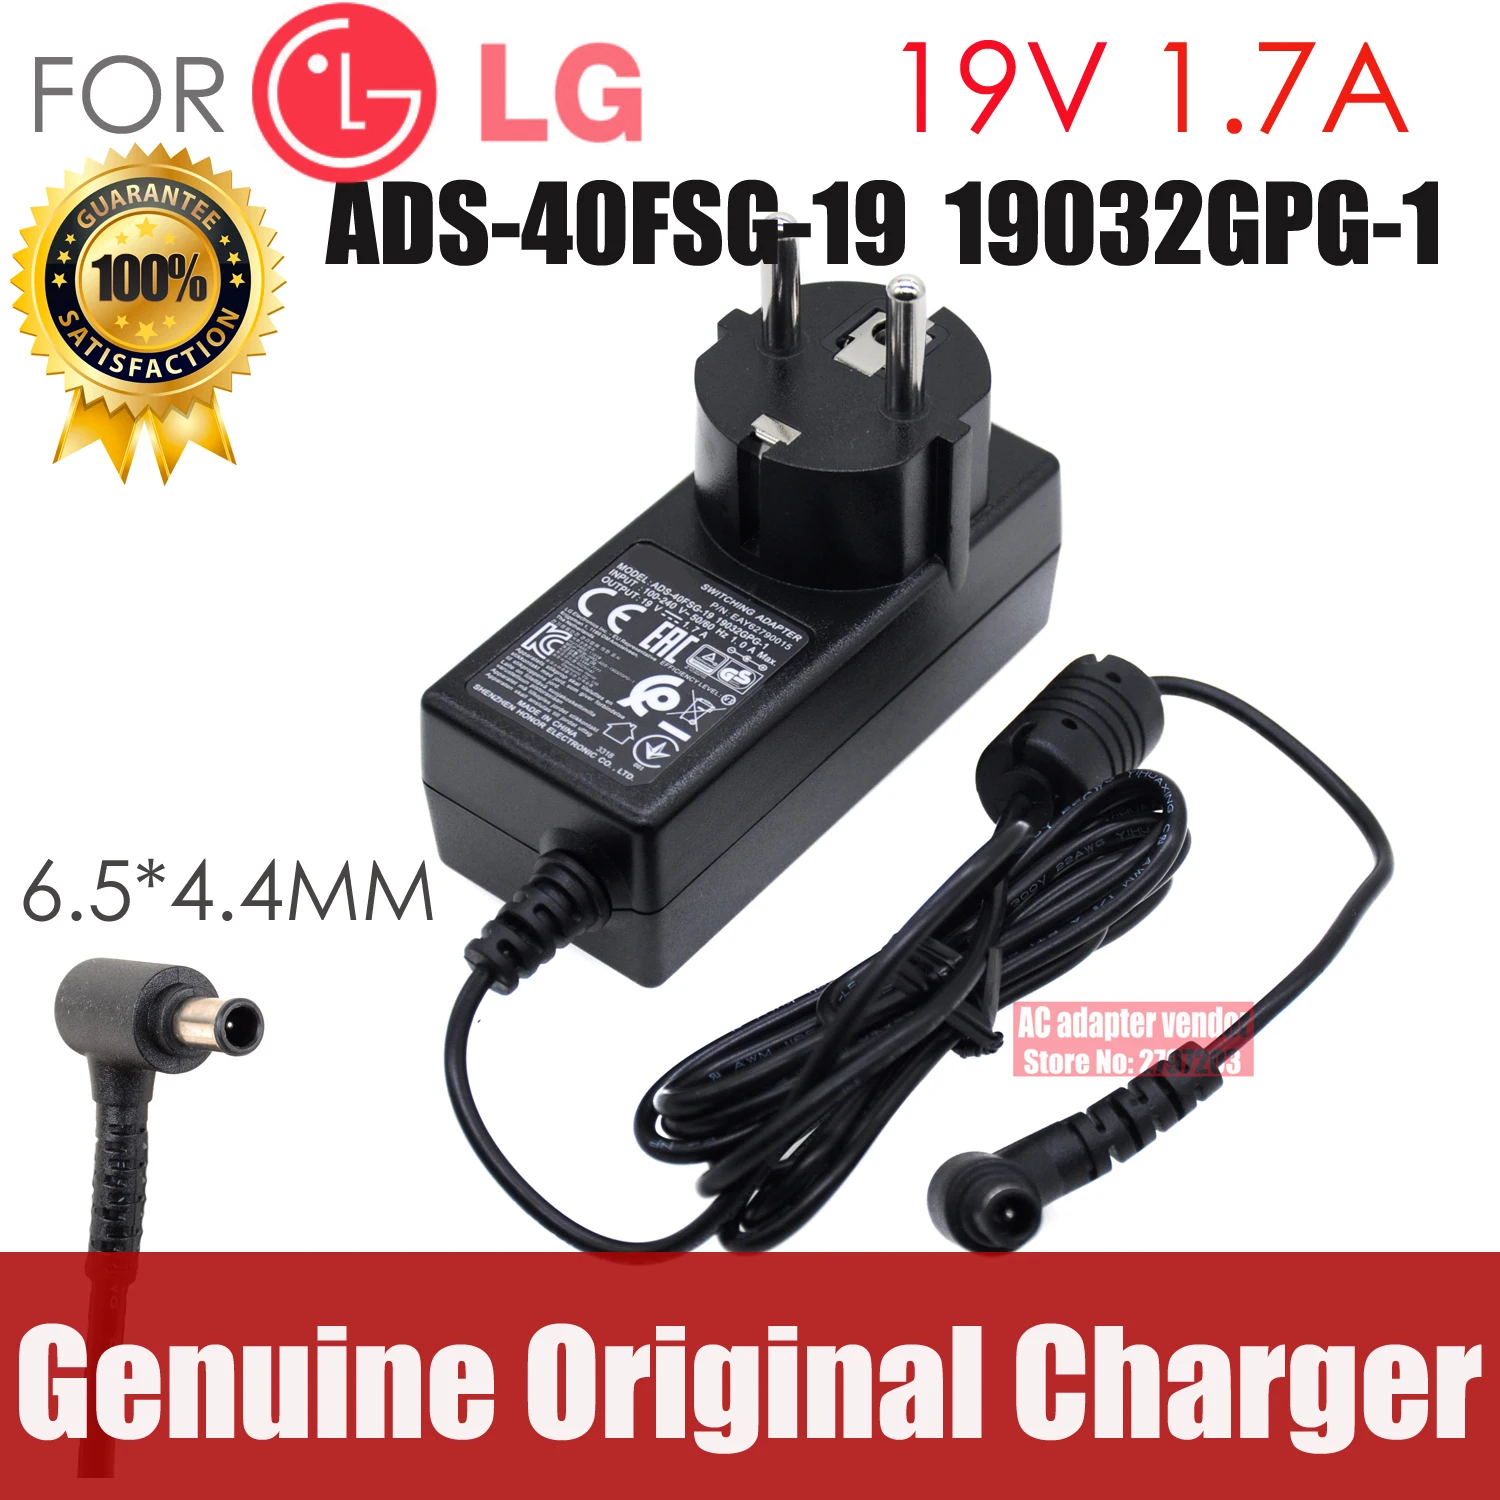 

new Original FOR LG 19V-1.7A ADS-40FSG-19 19032GPG-1 AC adapter Power supply Charger cord